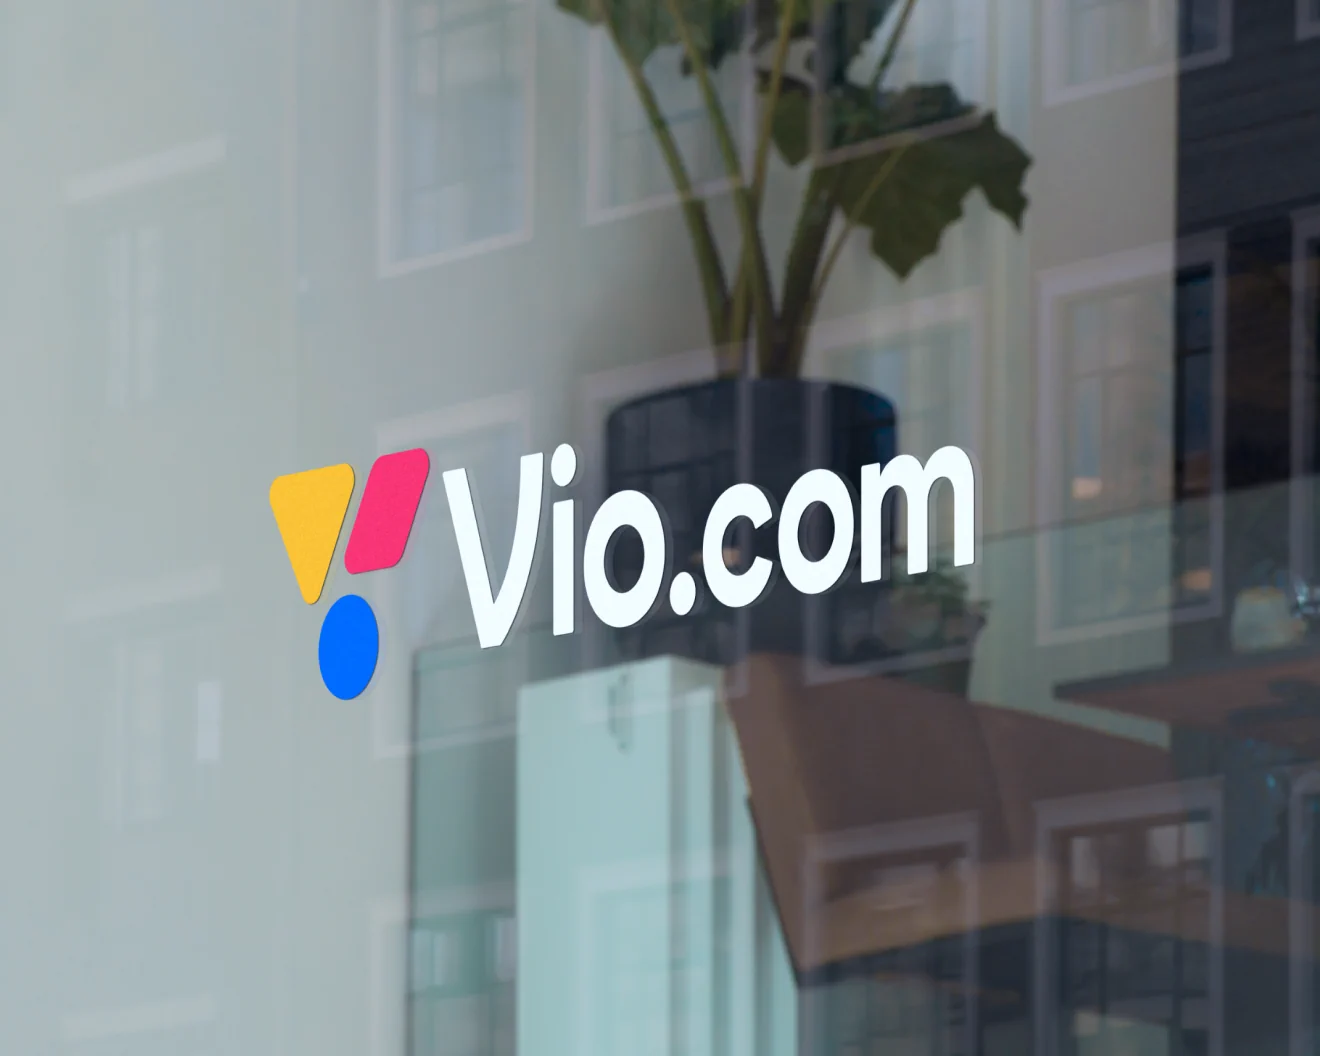 A photo of a glass window that shows the Vio.com logo in white text with yellow, blue and magenta-red colored shapes next to it. Behind the window is a plant and a couch, seemingly an office space.